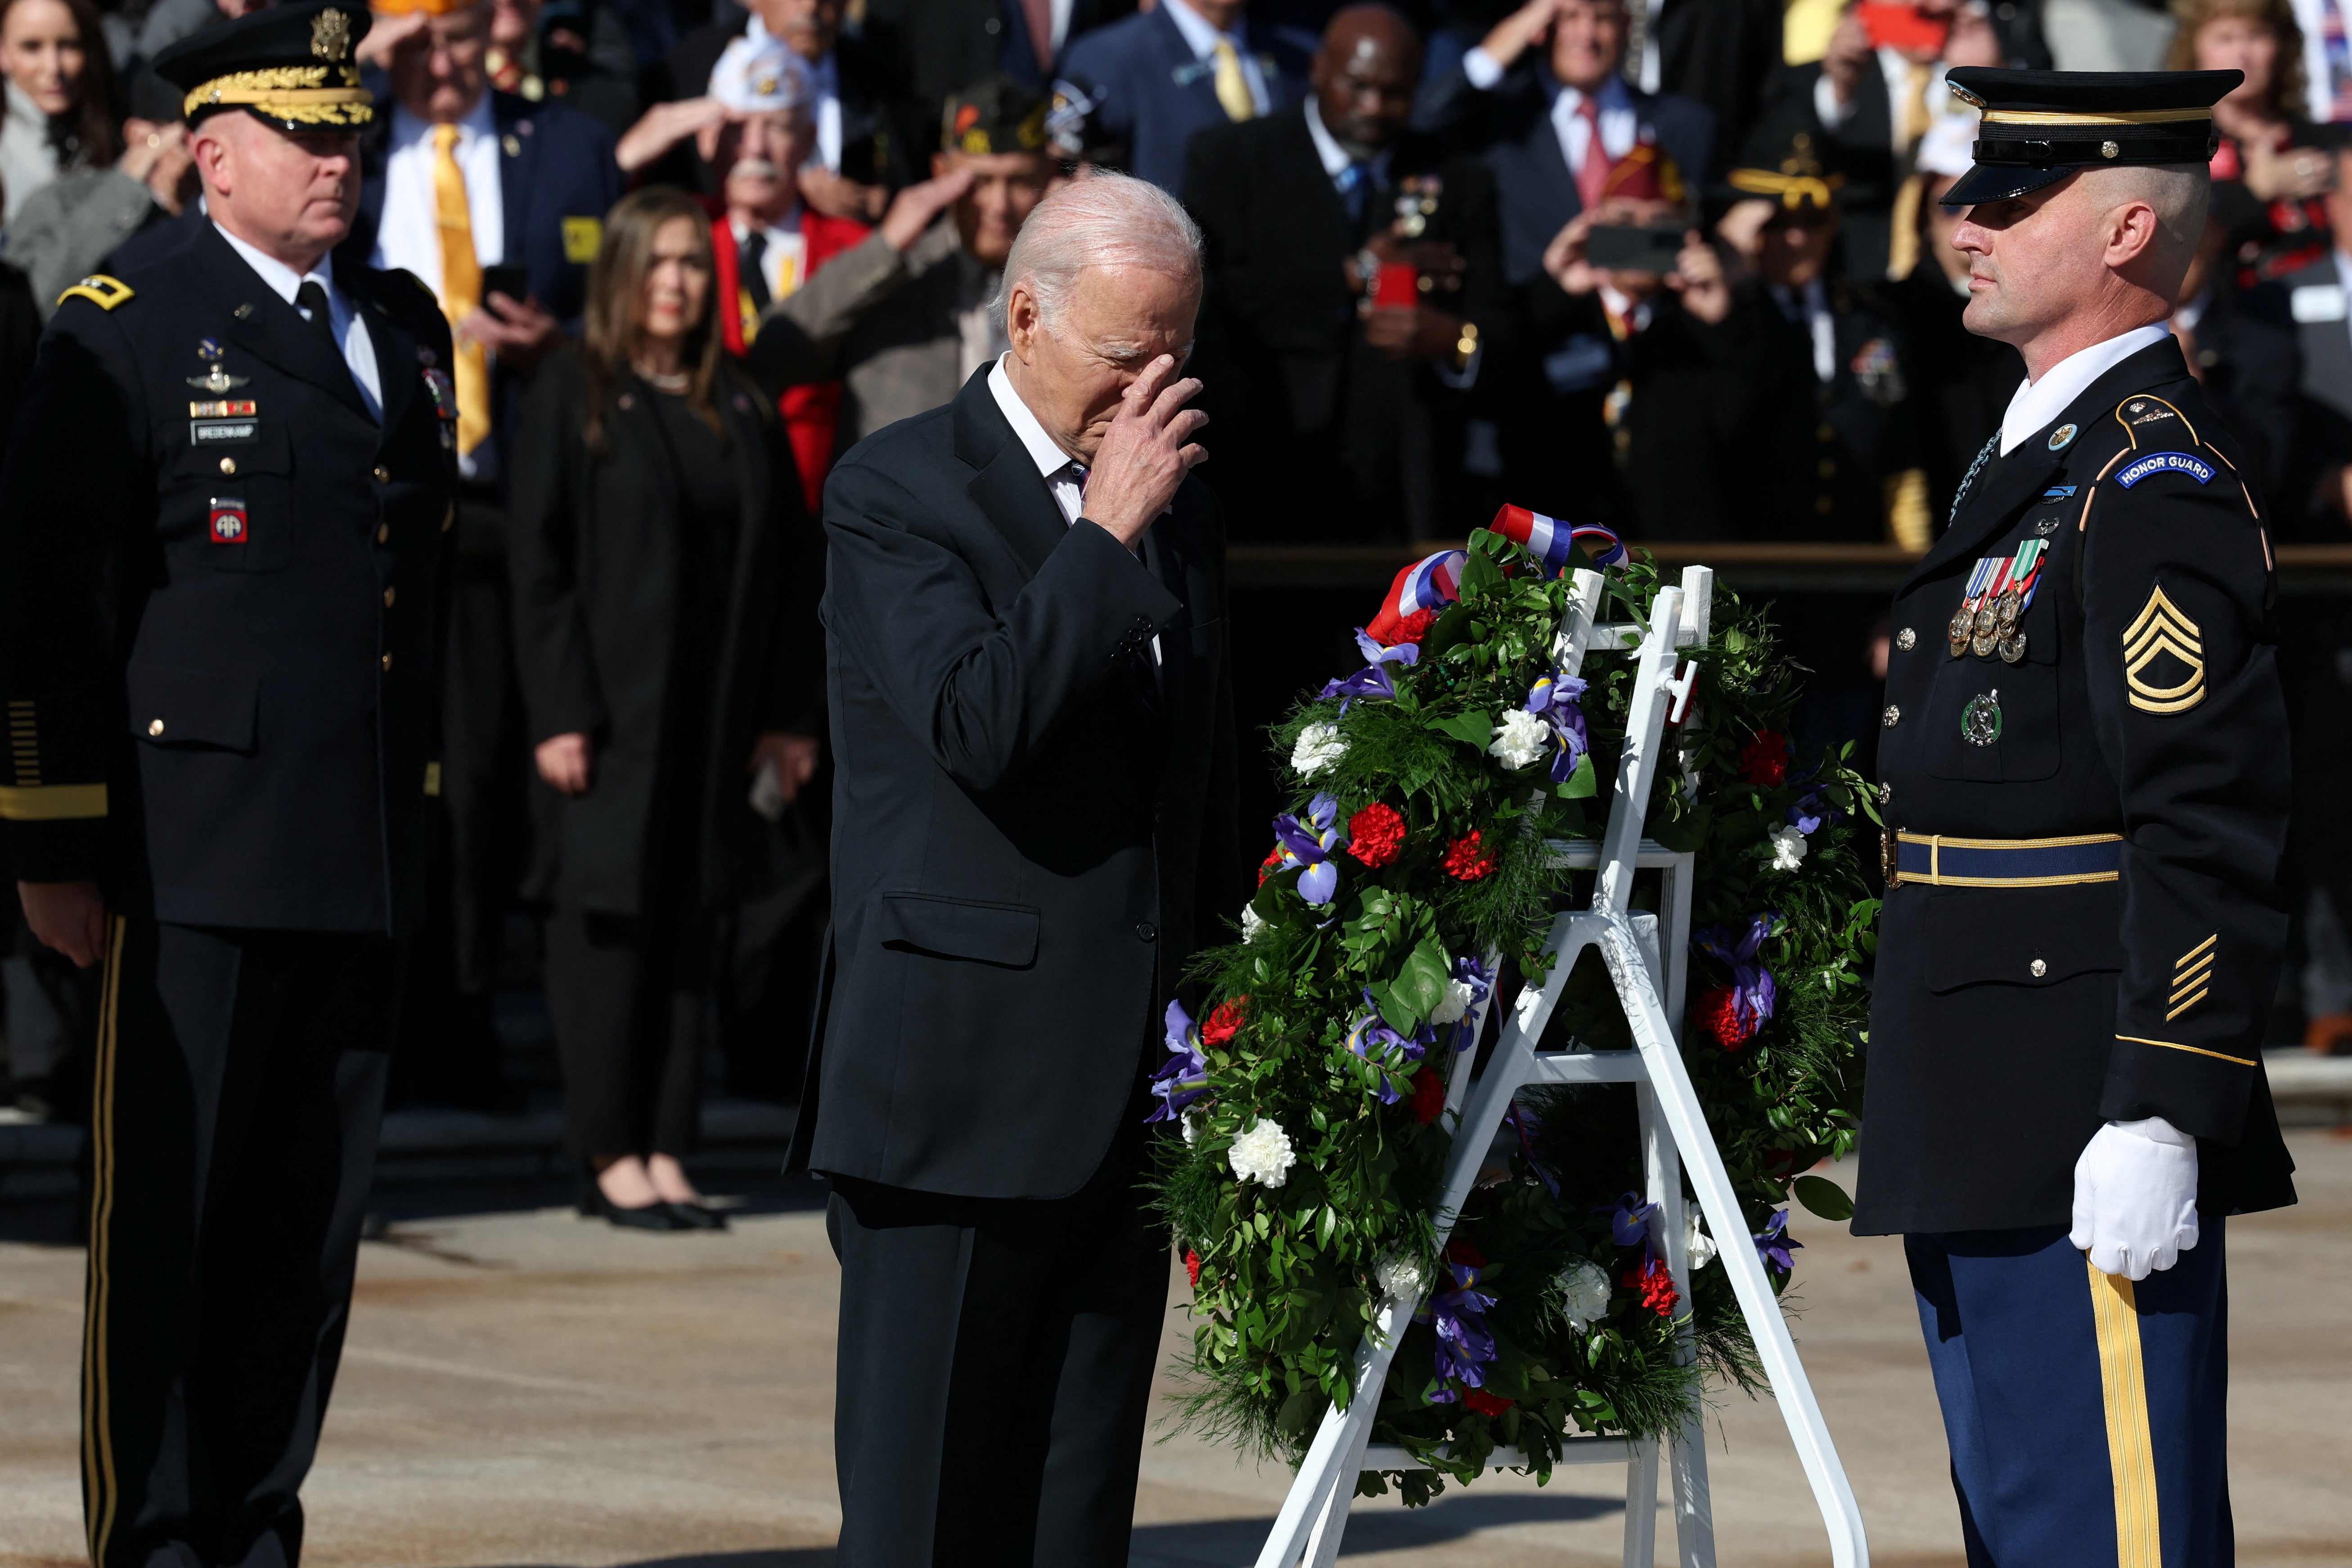 US President Joe Biden places a wreath while hosting veterans and members of the military community during a Veterans Day observance at the White House in Washington DC on 11 November